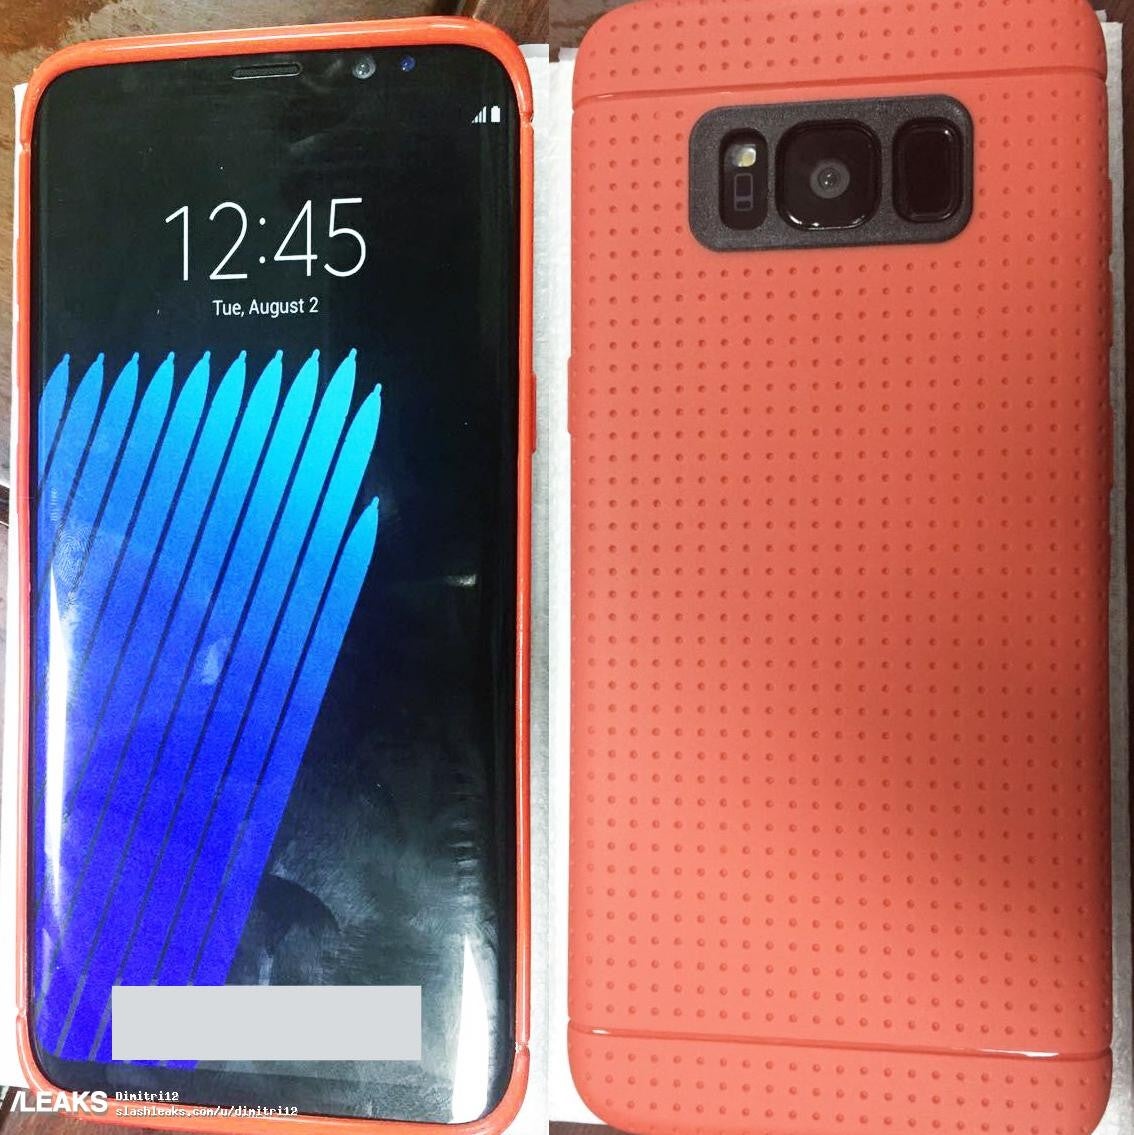 Samsung Galaxy S8 smiles for the camera all dressed up in protective case